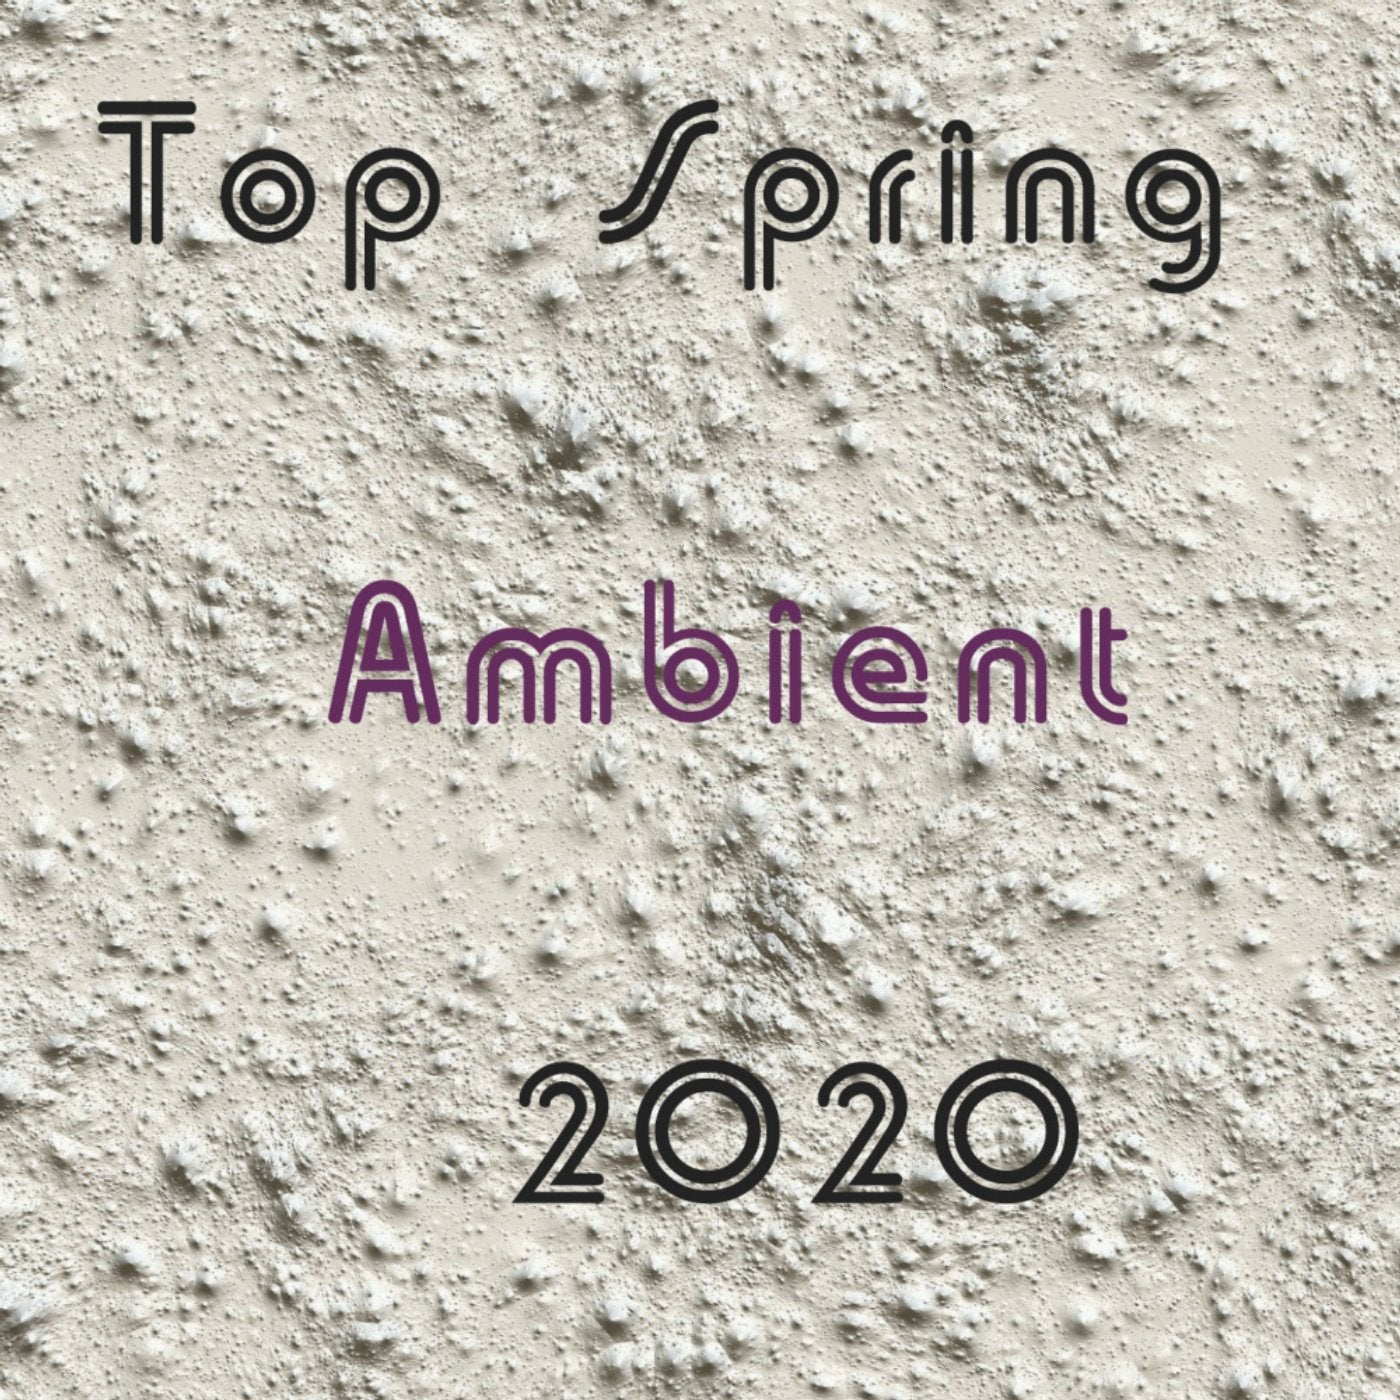 Top Spring Ambient 2020